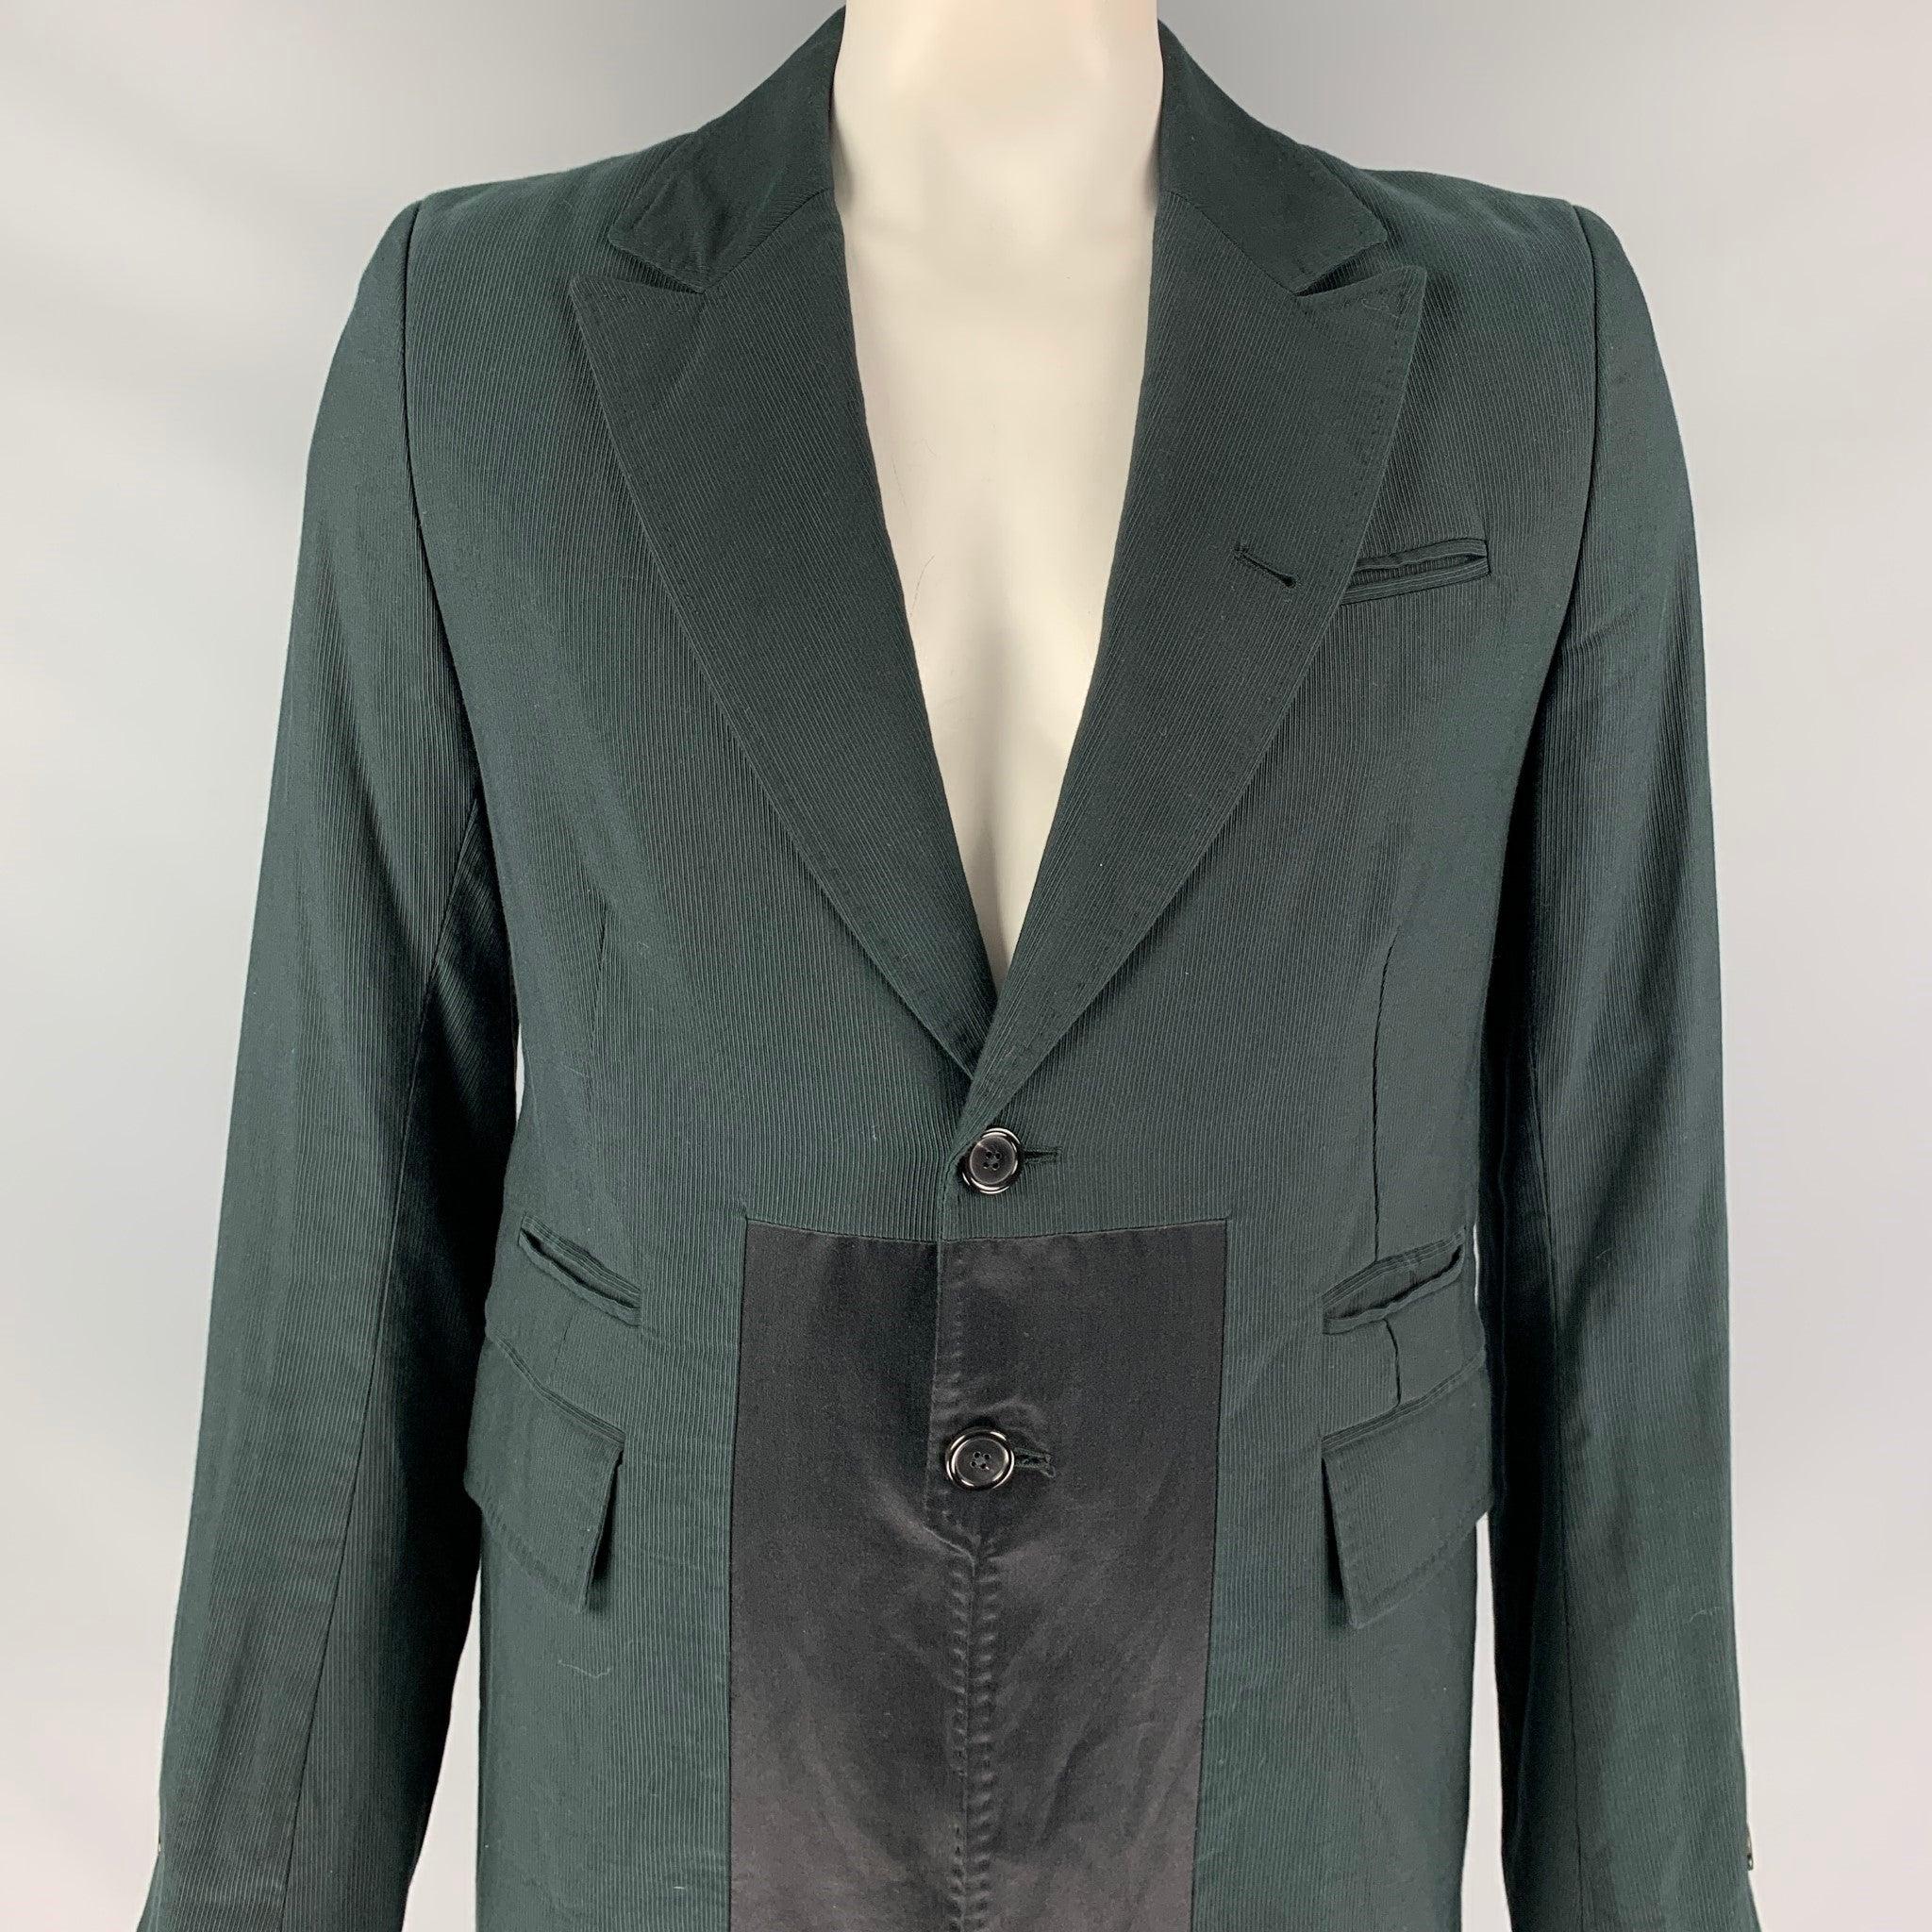 ANN DEMEULEMEESTER coat comes in a charcoal cotton with a front black panel detail featuring a peak lapel, front pockets, full liner, back slit, buttoned sleeve design, and a two button closure. Made in Italy.
Very Good
Pre-Owned Condition.